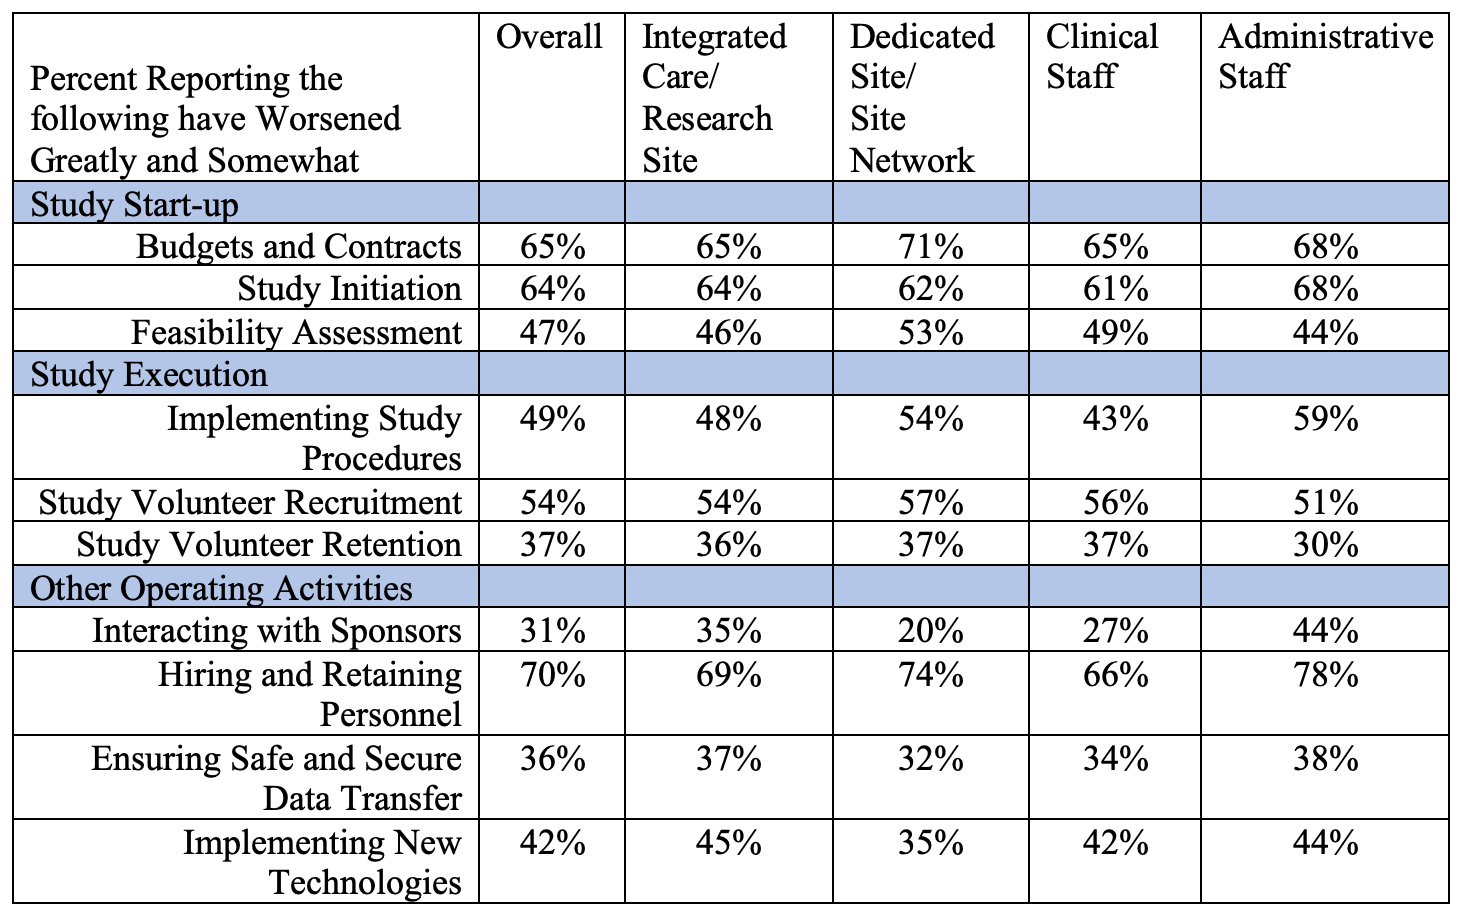 Table 2. Perceived change in site operating activities during the past five years by site type and role